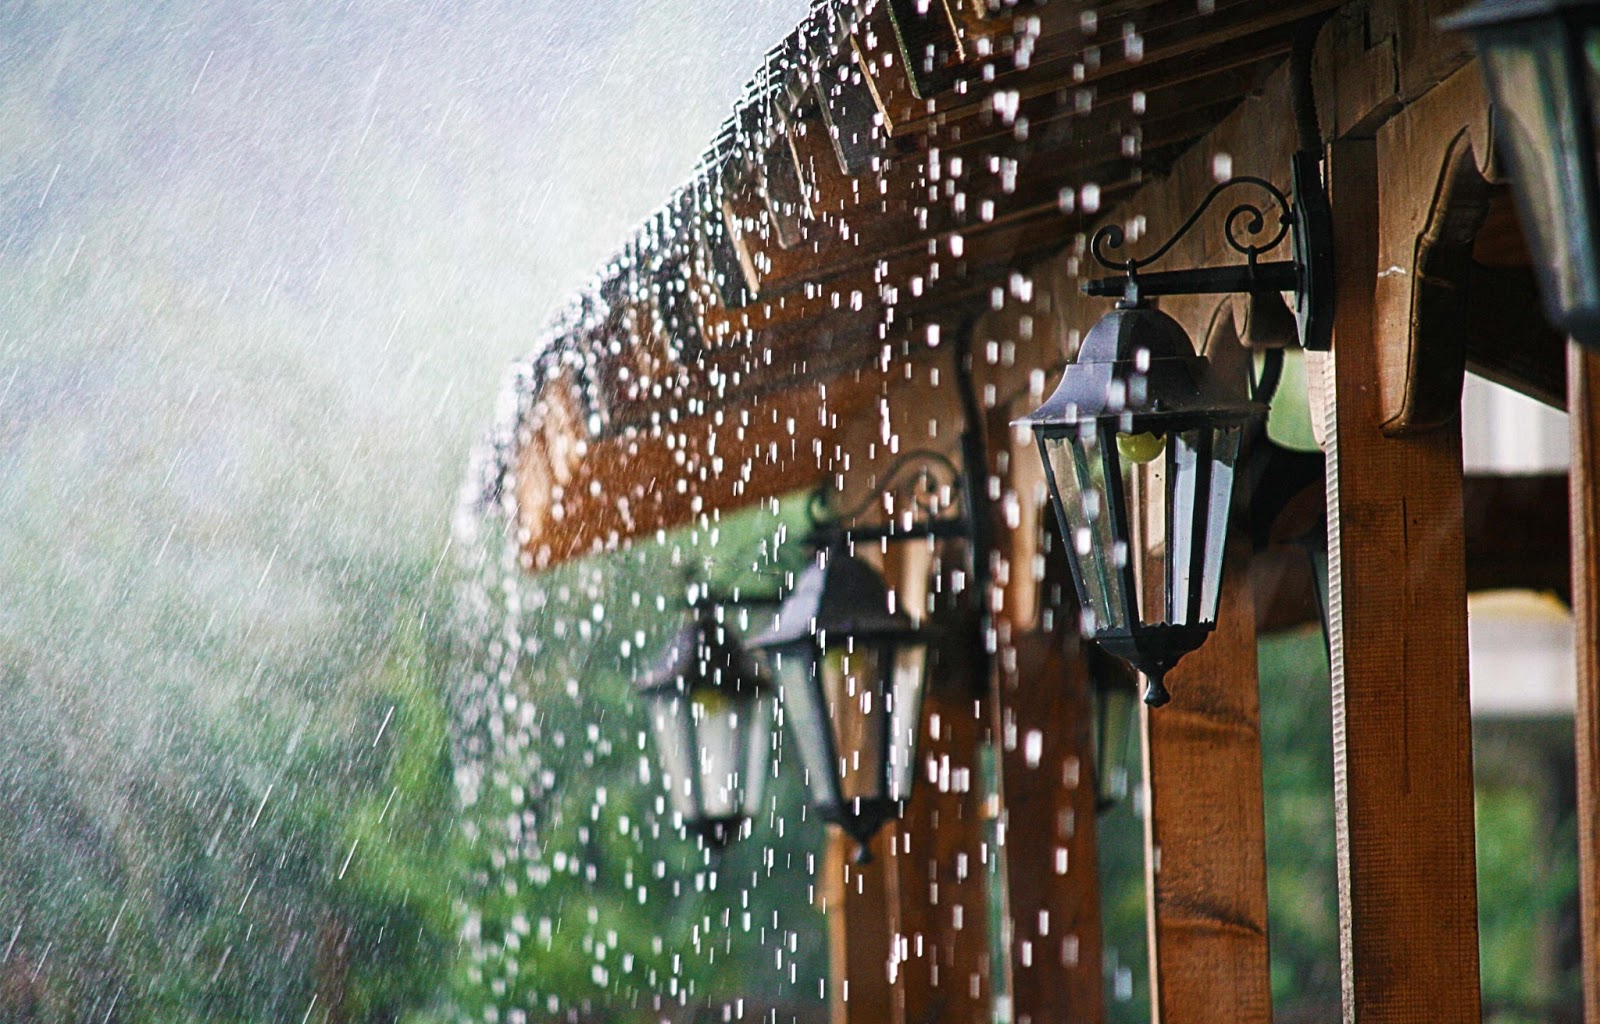 Rain Photography | HD Wallpapers (High Definition) | Free ...